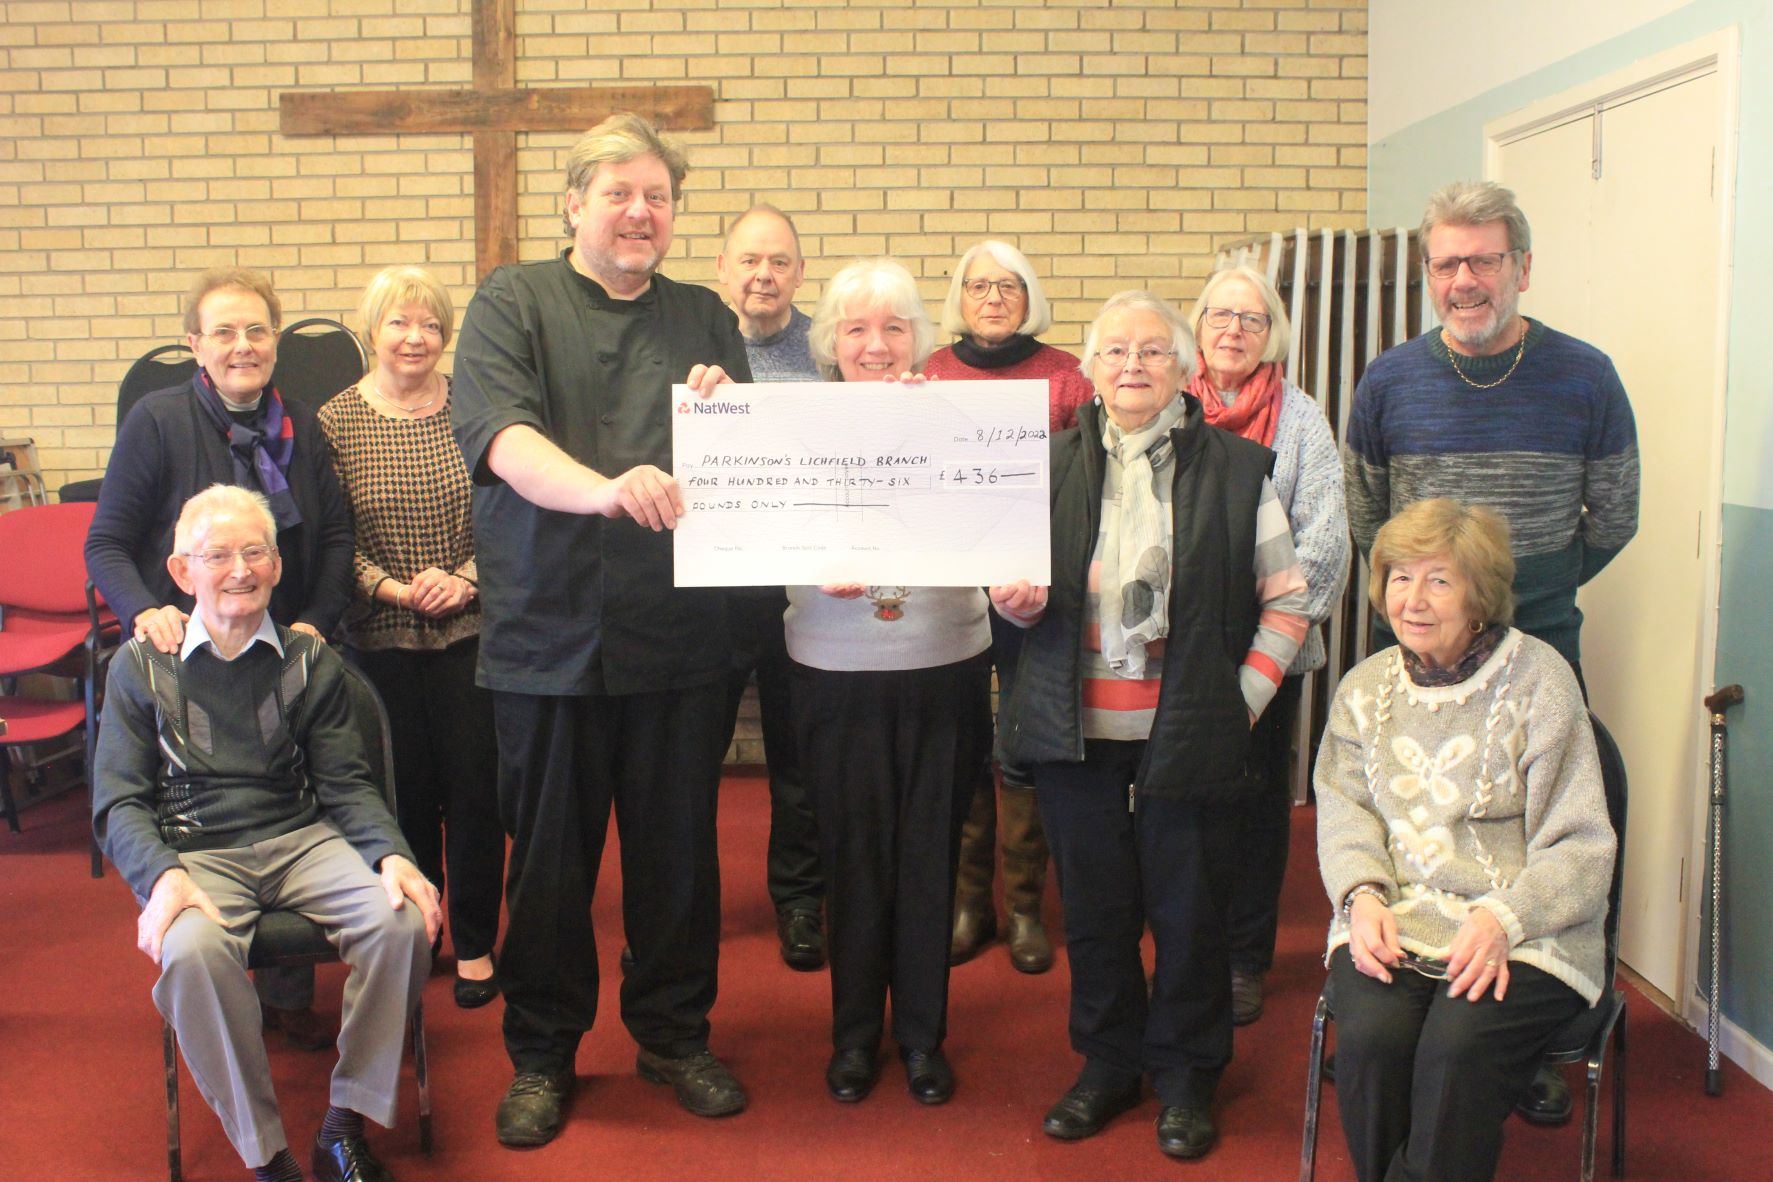 Barry Gwilt presents a cheque to members of Parkinson's UK Lichfield and District Branch.